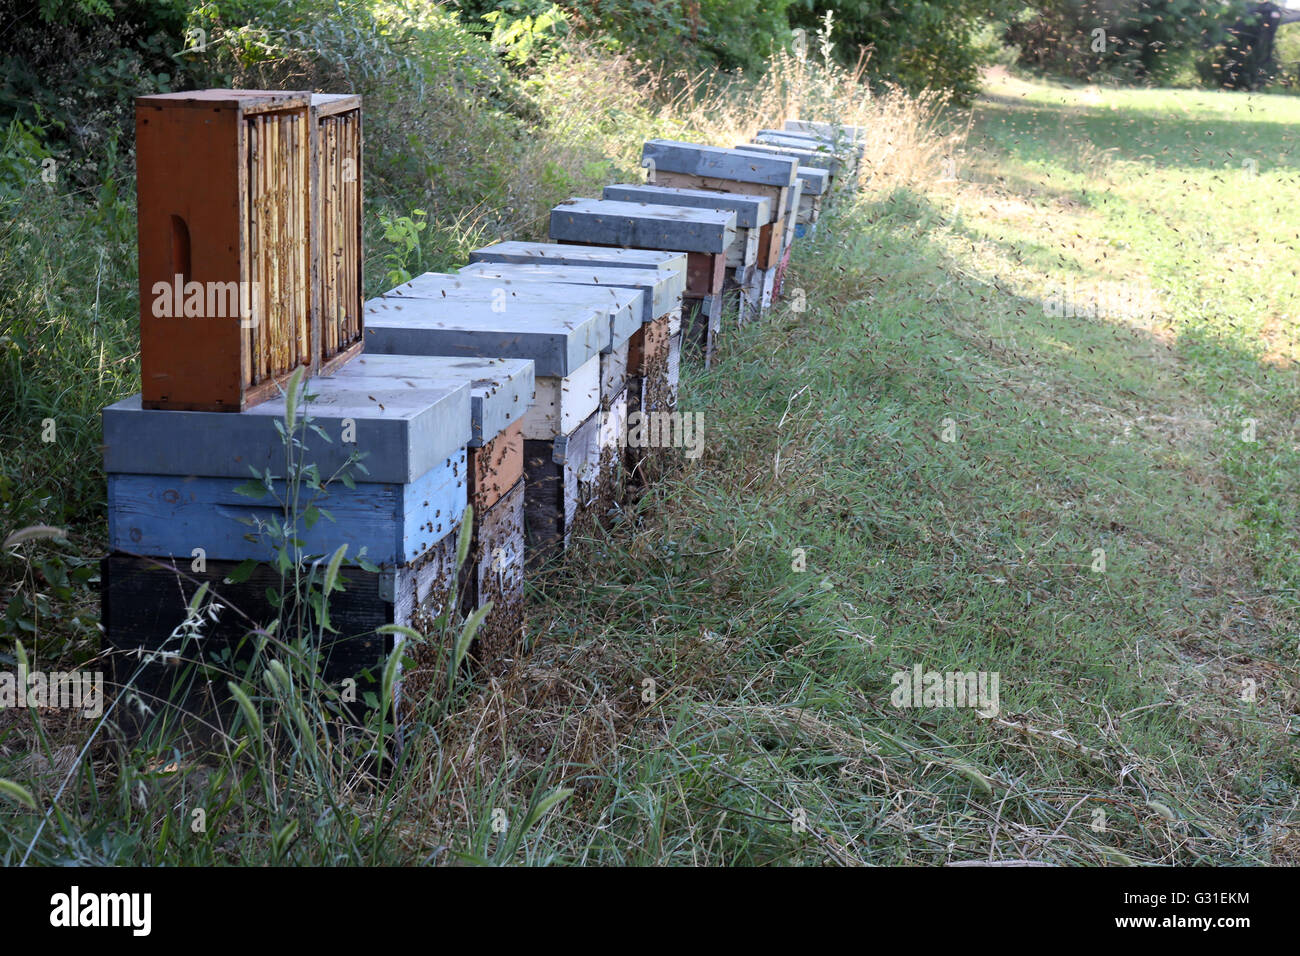 Castel Giorgio, Italy, hives stand on the edge of a meadow Stock Photo